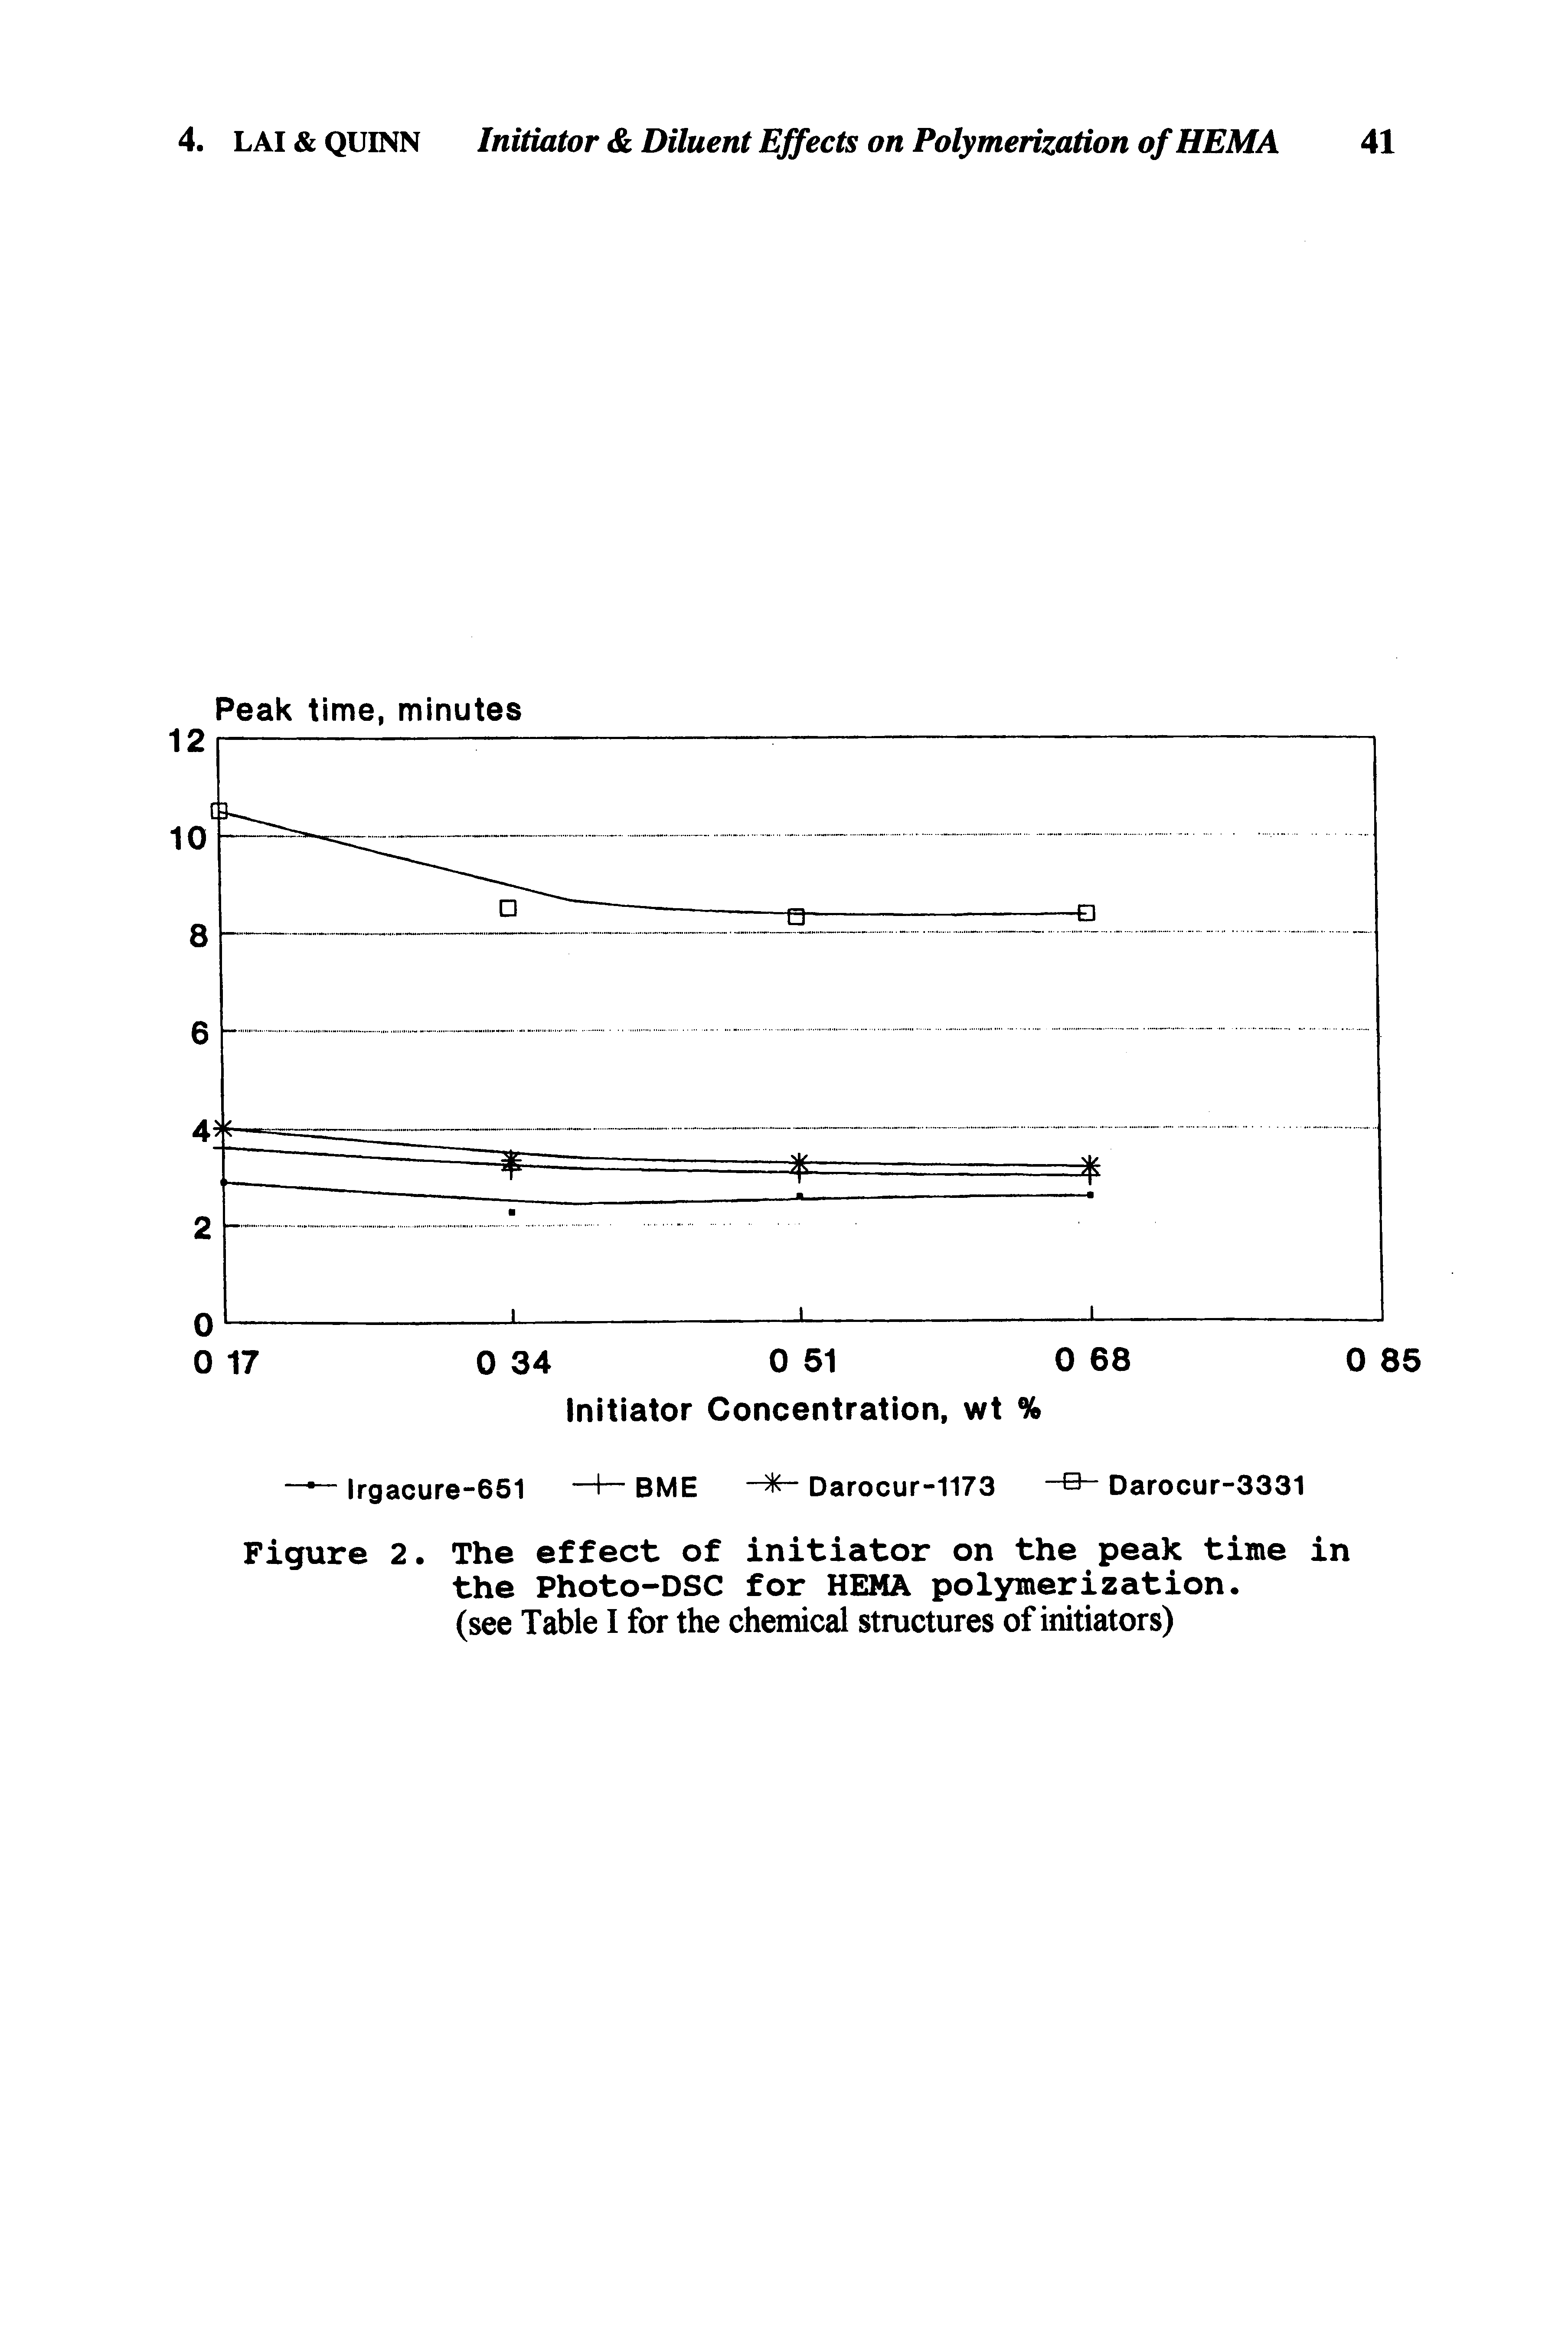 Figure 2. The effect of initiator on the peak time in the Photo-DSC for HEMA polymerization.